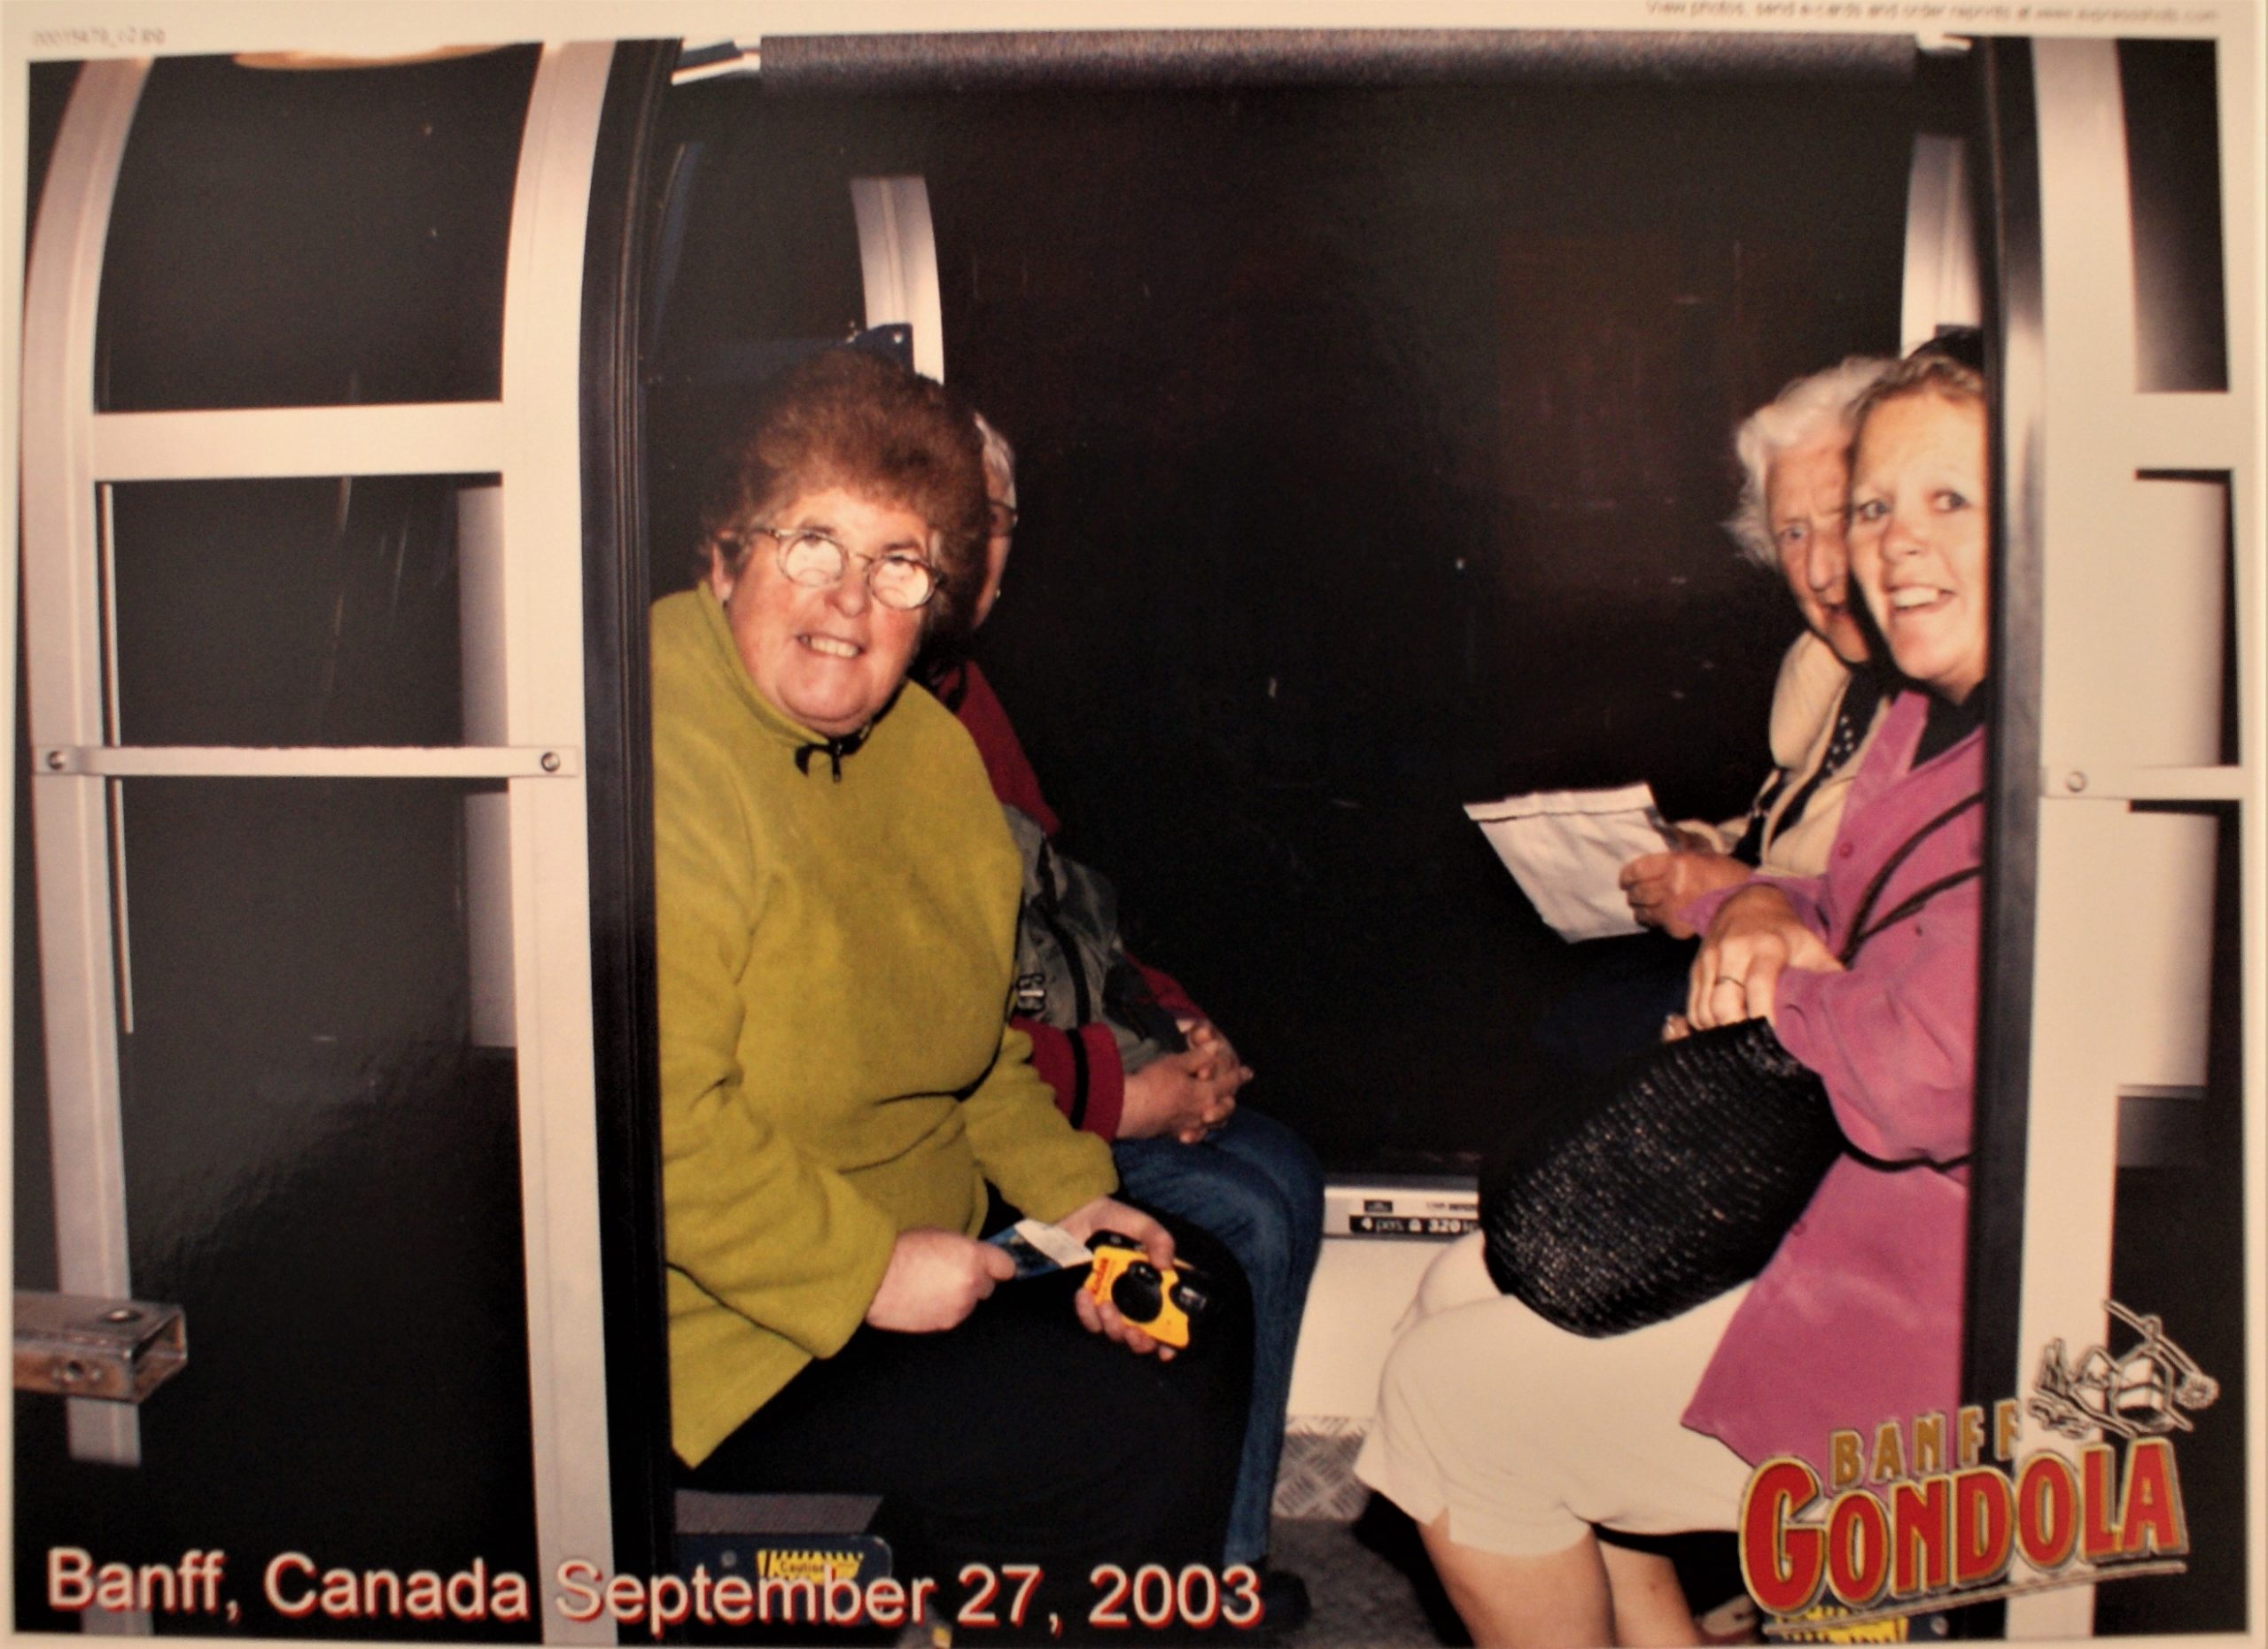 Lesley is looking out the open door of a gondola cart. Three other travellers are with her. The image is overprinted with the words Banff Gondola Banff, Canada September 27 2003